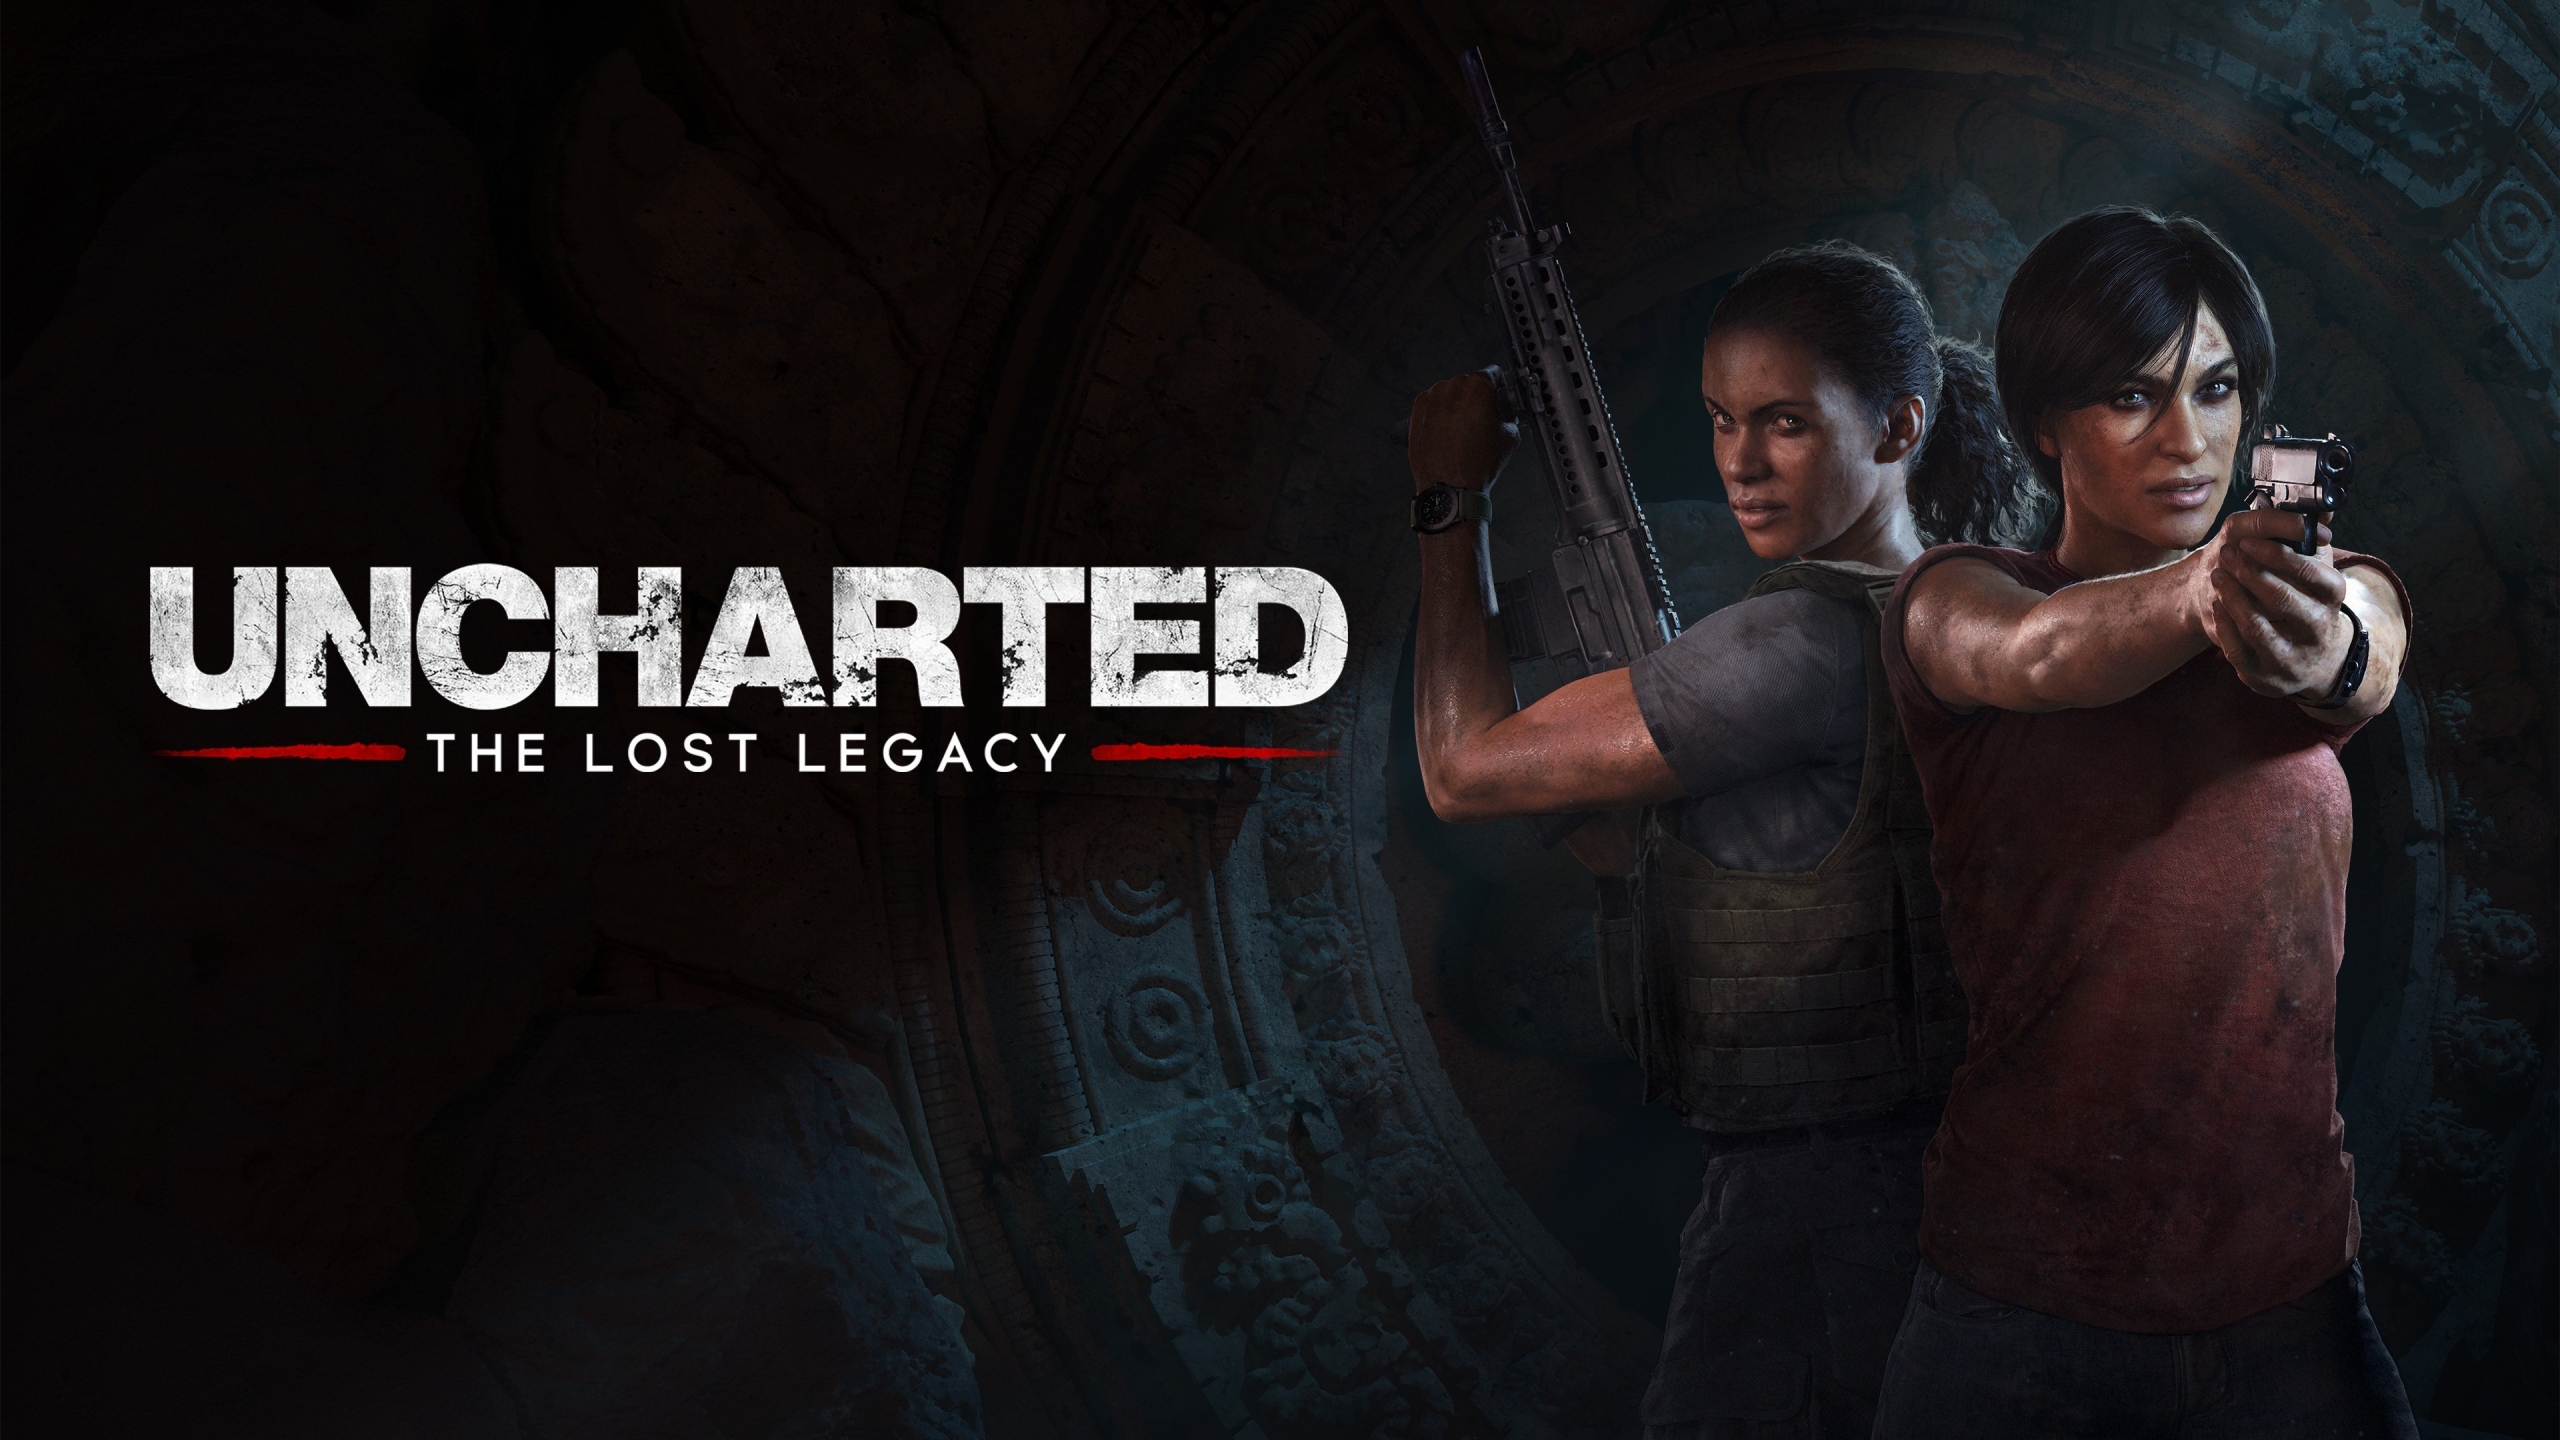 Uncharted The Lost Legacy for 2560x1440 HDTV resolution